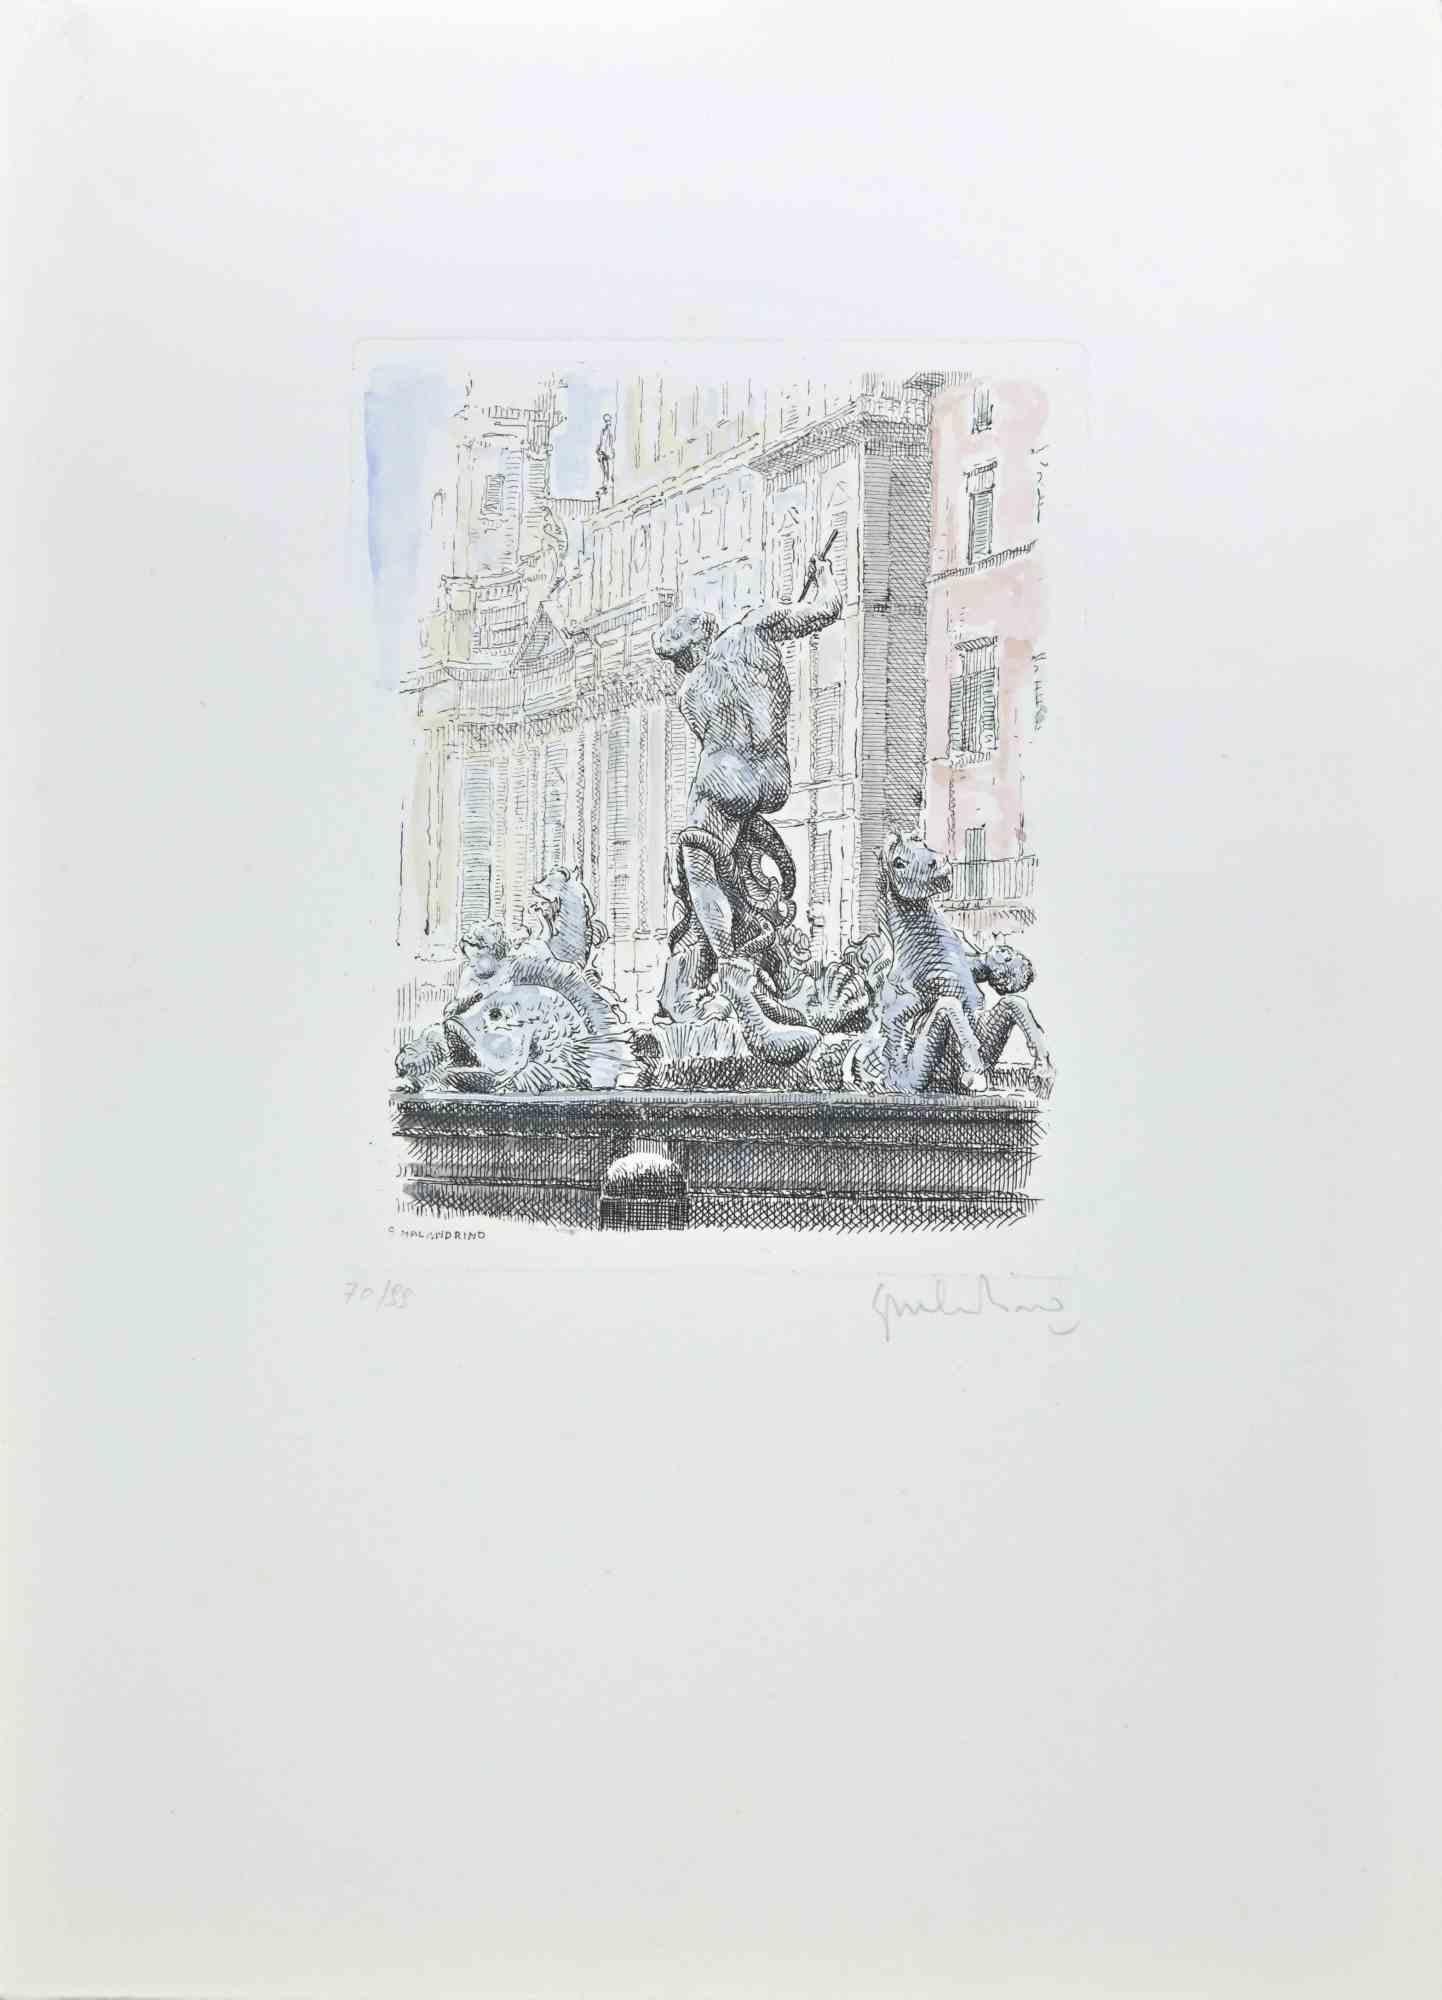 Fountain of the Triton is an artwork realized by Giuseppe Malandrino.

Original print in etching technique, hand watercolored.

Hand-signed by the artist in pencil on the lower right corner.

Numbered edition of 99 copies.

Good condition. 

This